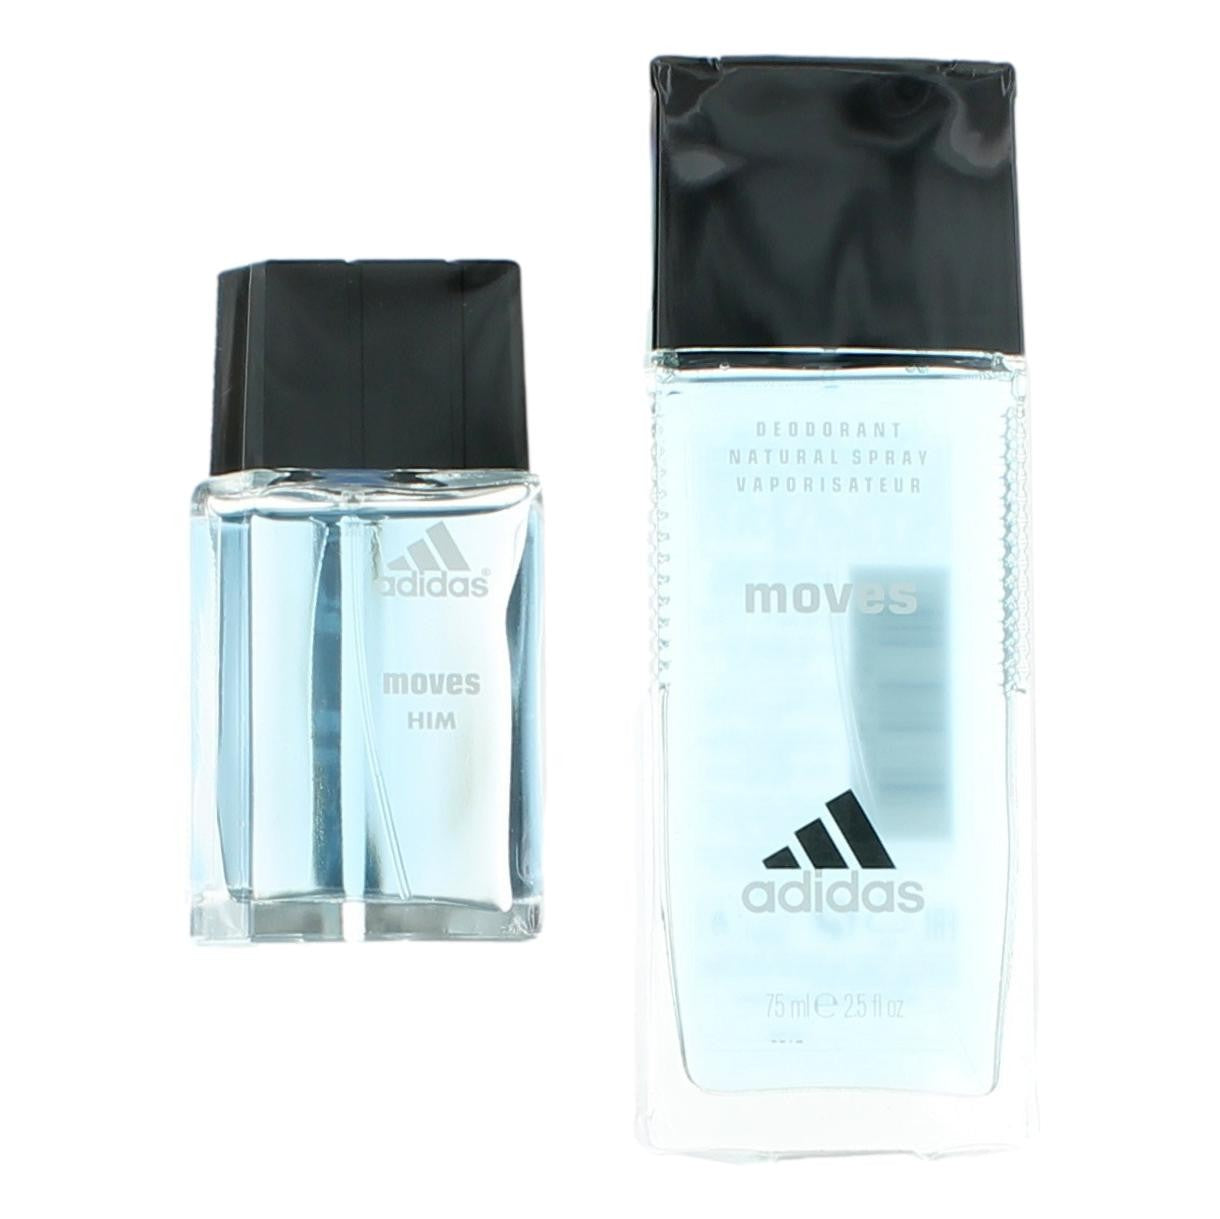 Adidas Moves by Adidas, 2 Piece Gift Set for Men